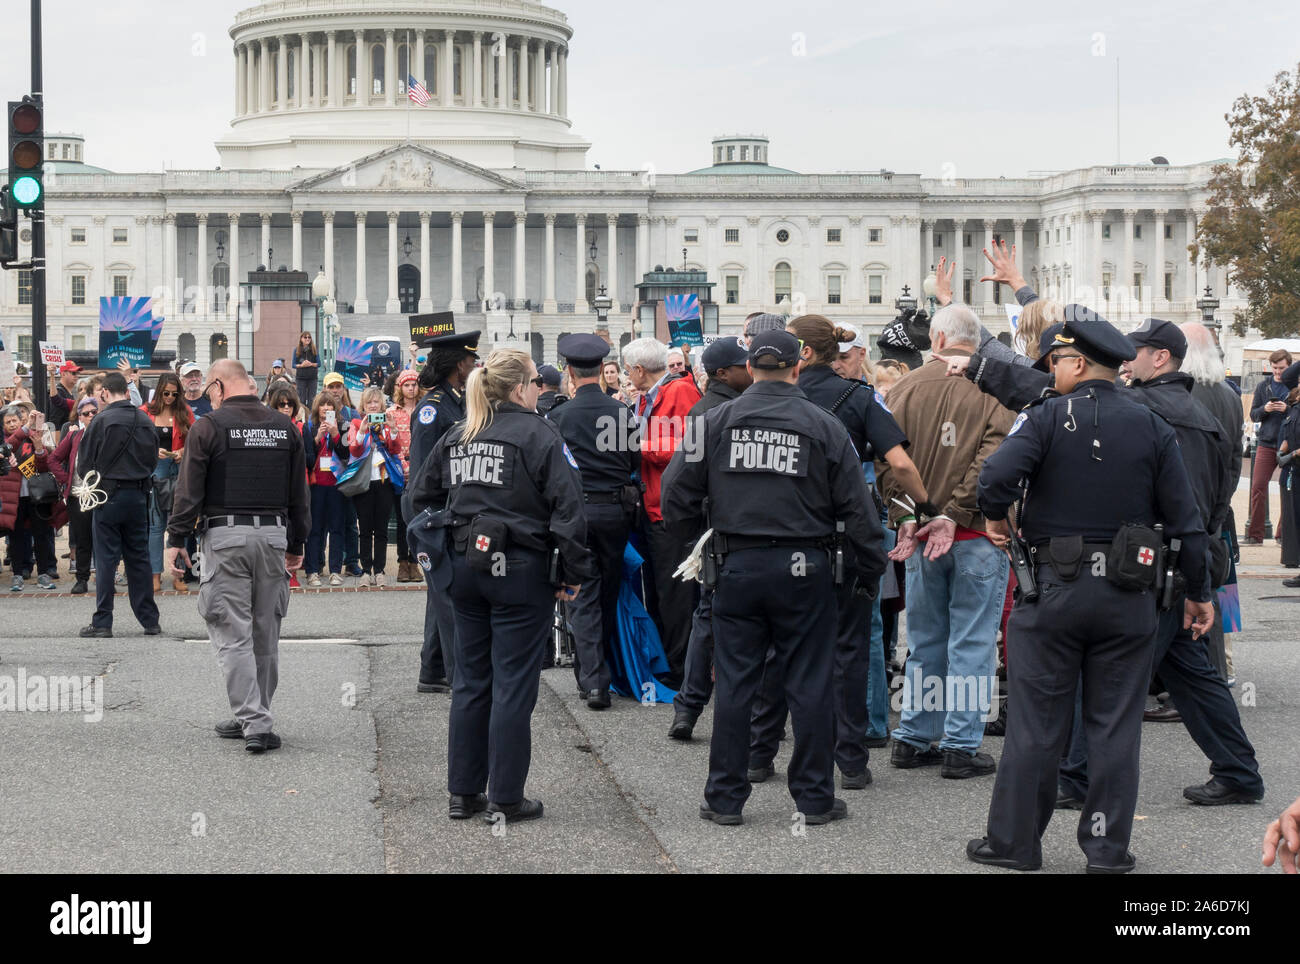 Washington, DC - Oct. 25, 2019: Actress and activist Jane Fonda's ongoing Fire Drill Friday protest at the U.S. Capitol demanding government action on climate change and ending reliance on 'corrupt' fossil fuel industry. Actor Ted Danson joined this third weekly demonstration; he, Ms. Fonda and 30 others were arrested after blocking First Street in front of the Capitol Building, while dozens of supporters cheered them on. Stock Photo